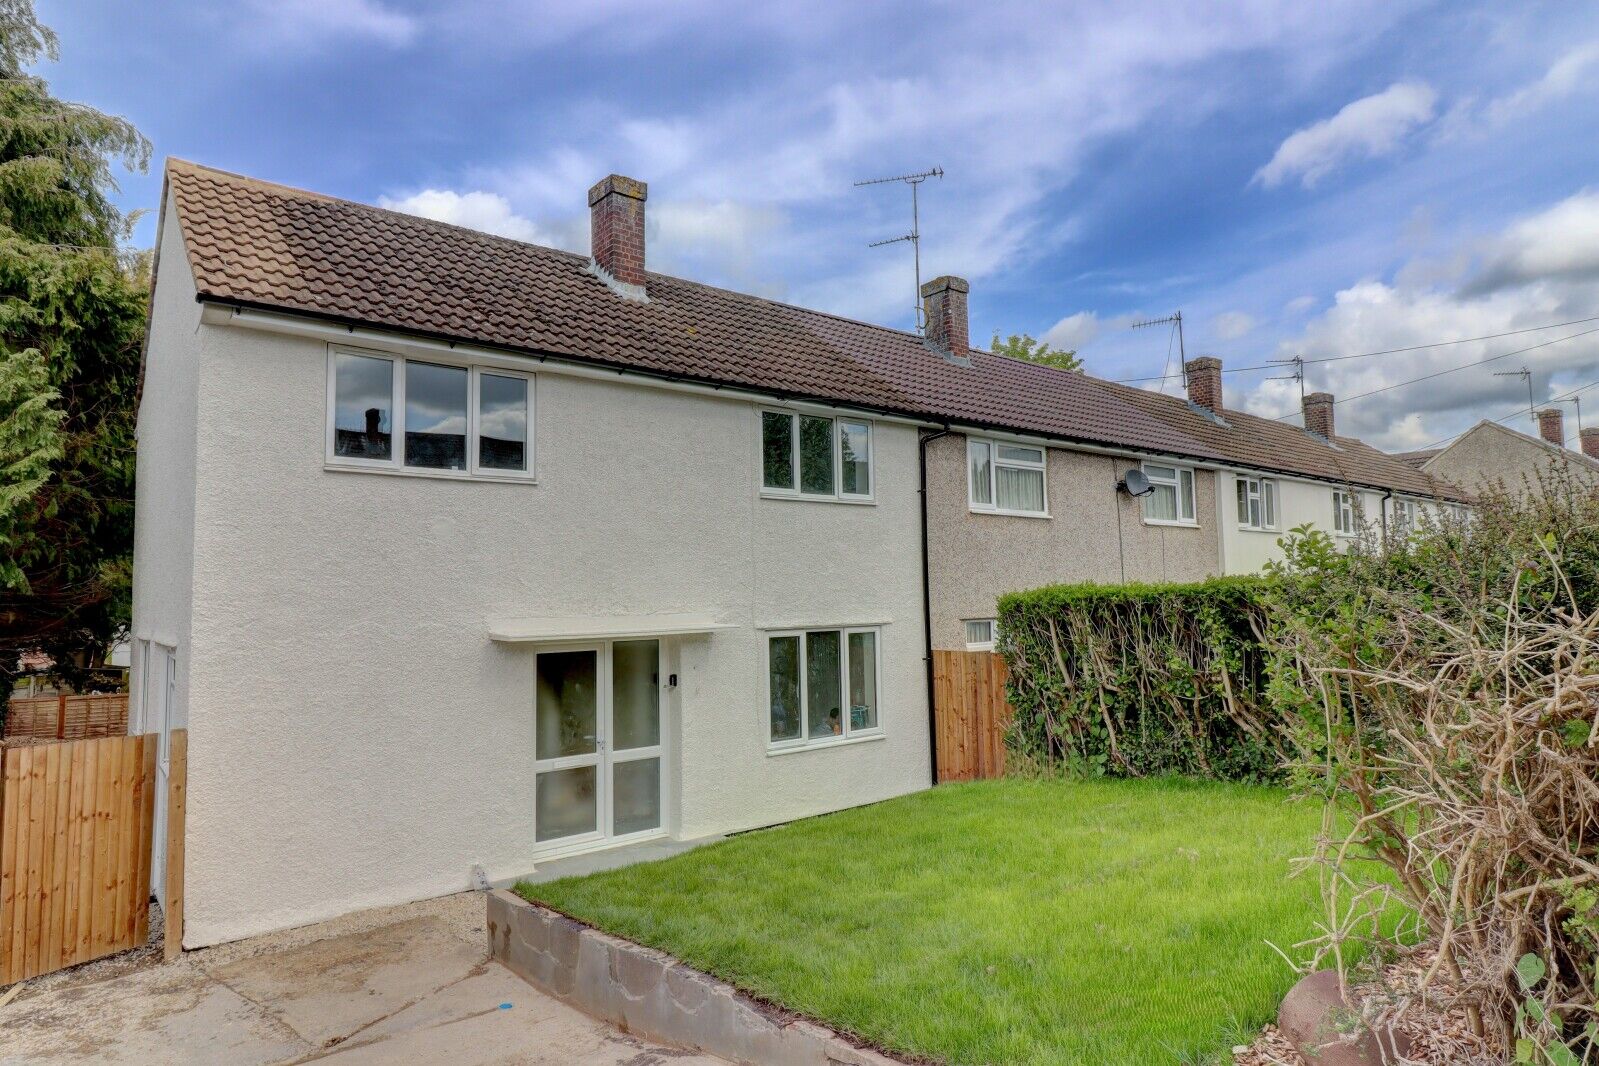 3 bedroom end terraced house for sale Southfield Road, Princes Risborough, HP27, main image